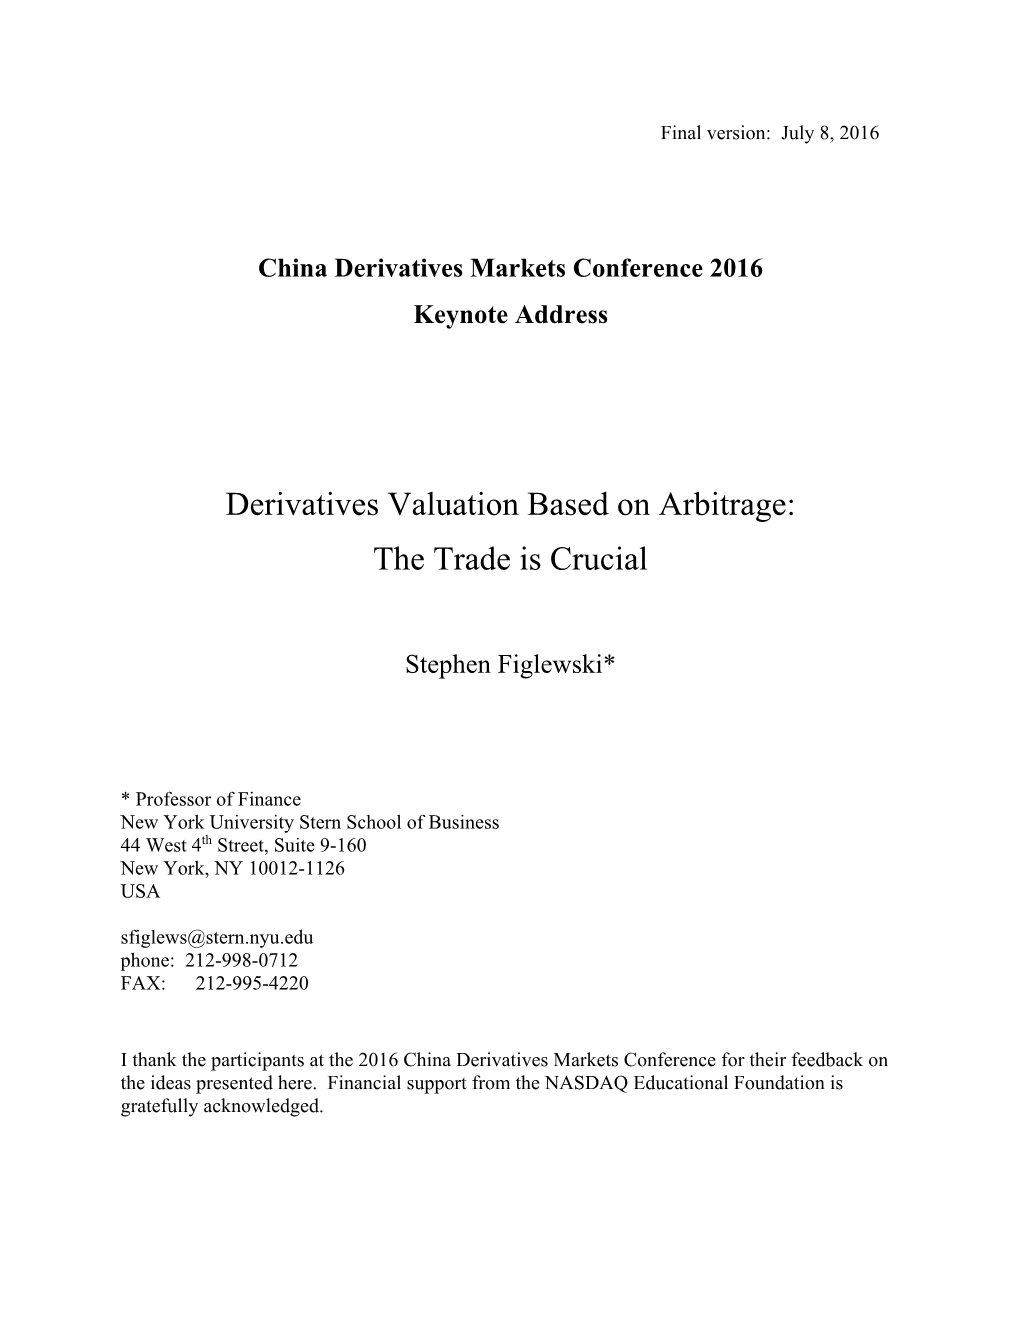 Derivatives Valuation Based on Arbitrage: the Trade Is Crucial